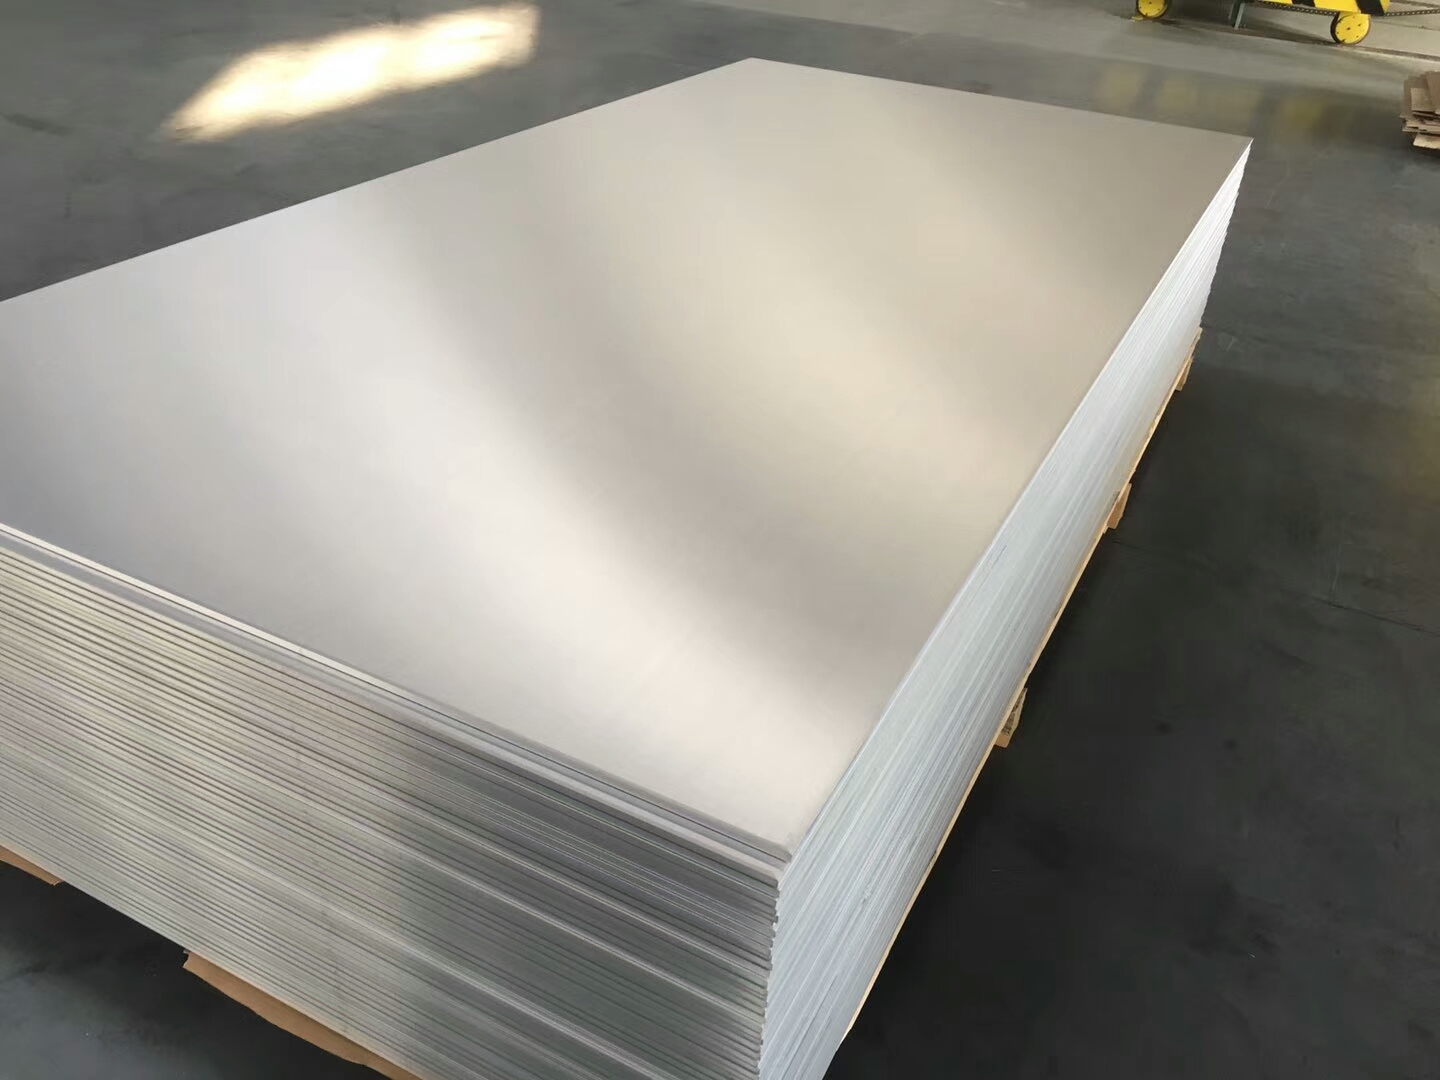 Chassis Cabinet, 5052H32 Aluminum Plate For Precision Sheet Metal